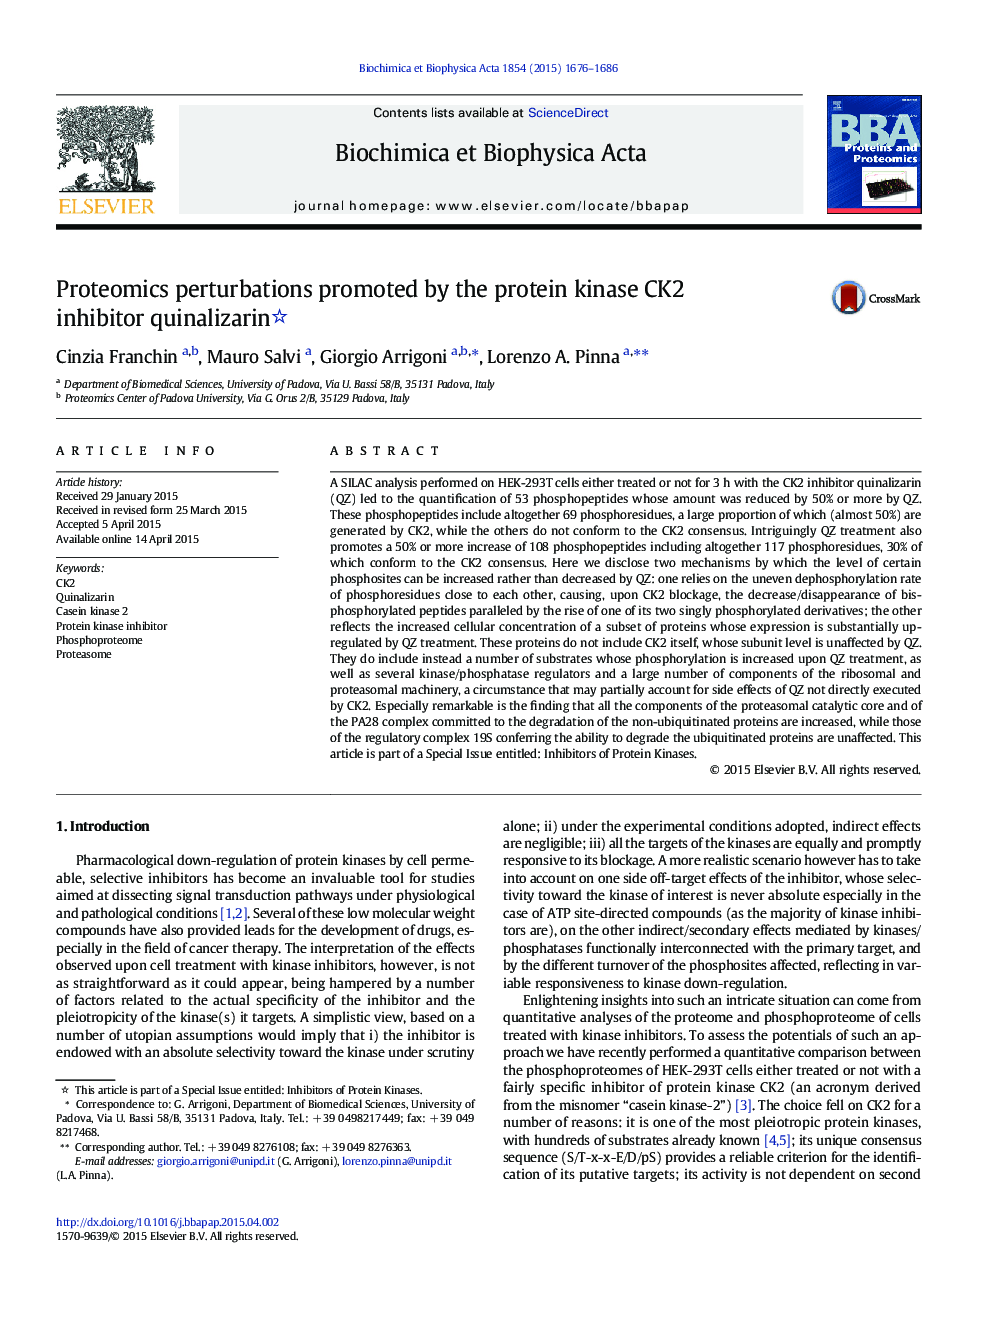 Proteomics perturbations promoted by the protein kinase CK2 inhibitor quinalizarin 